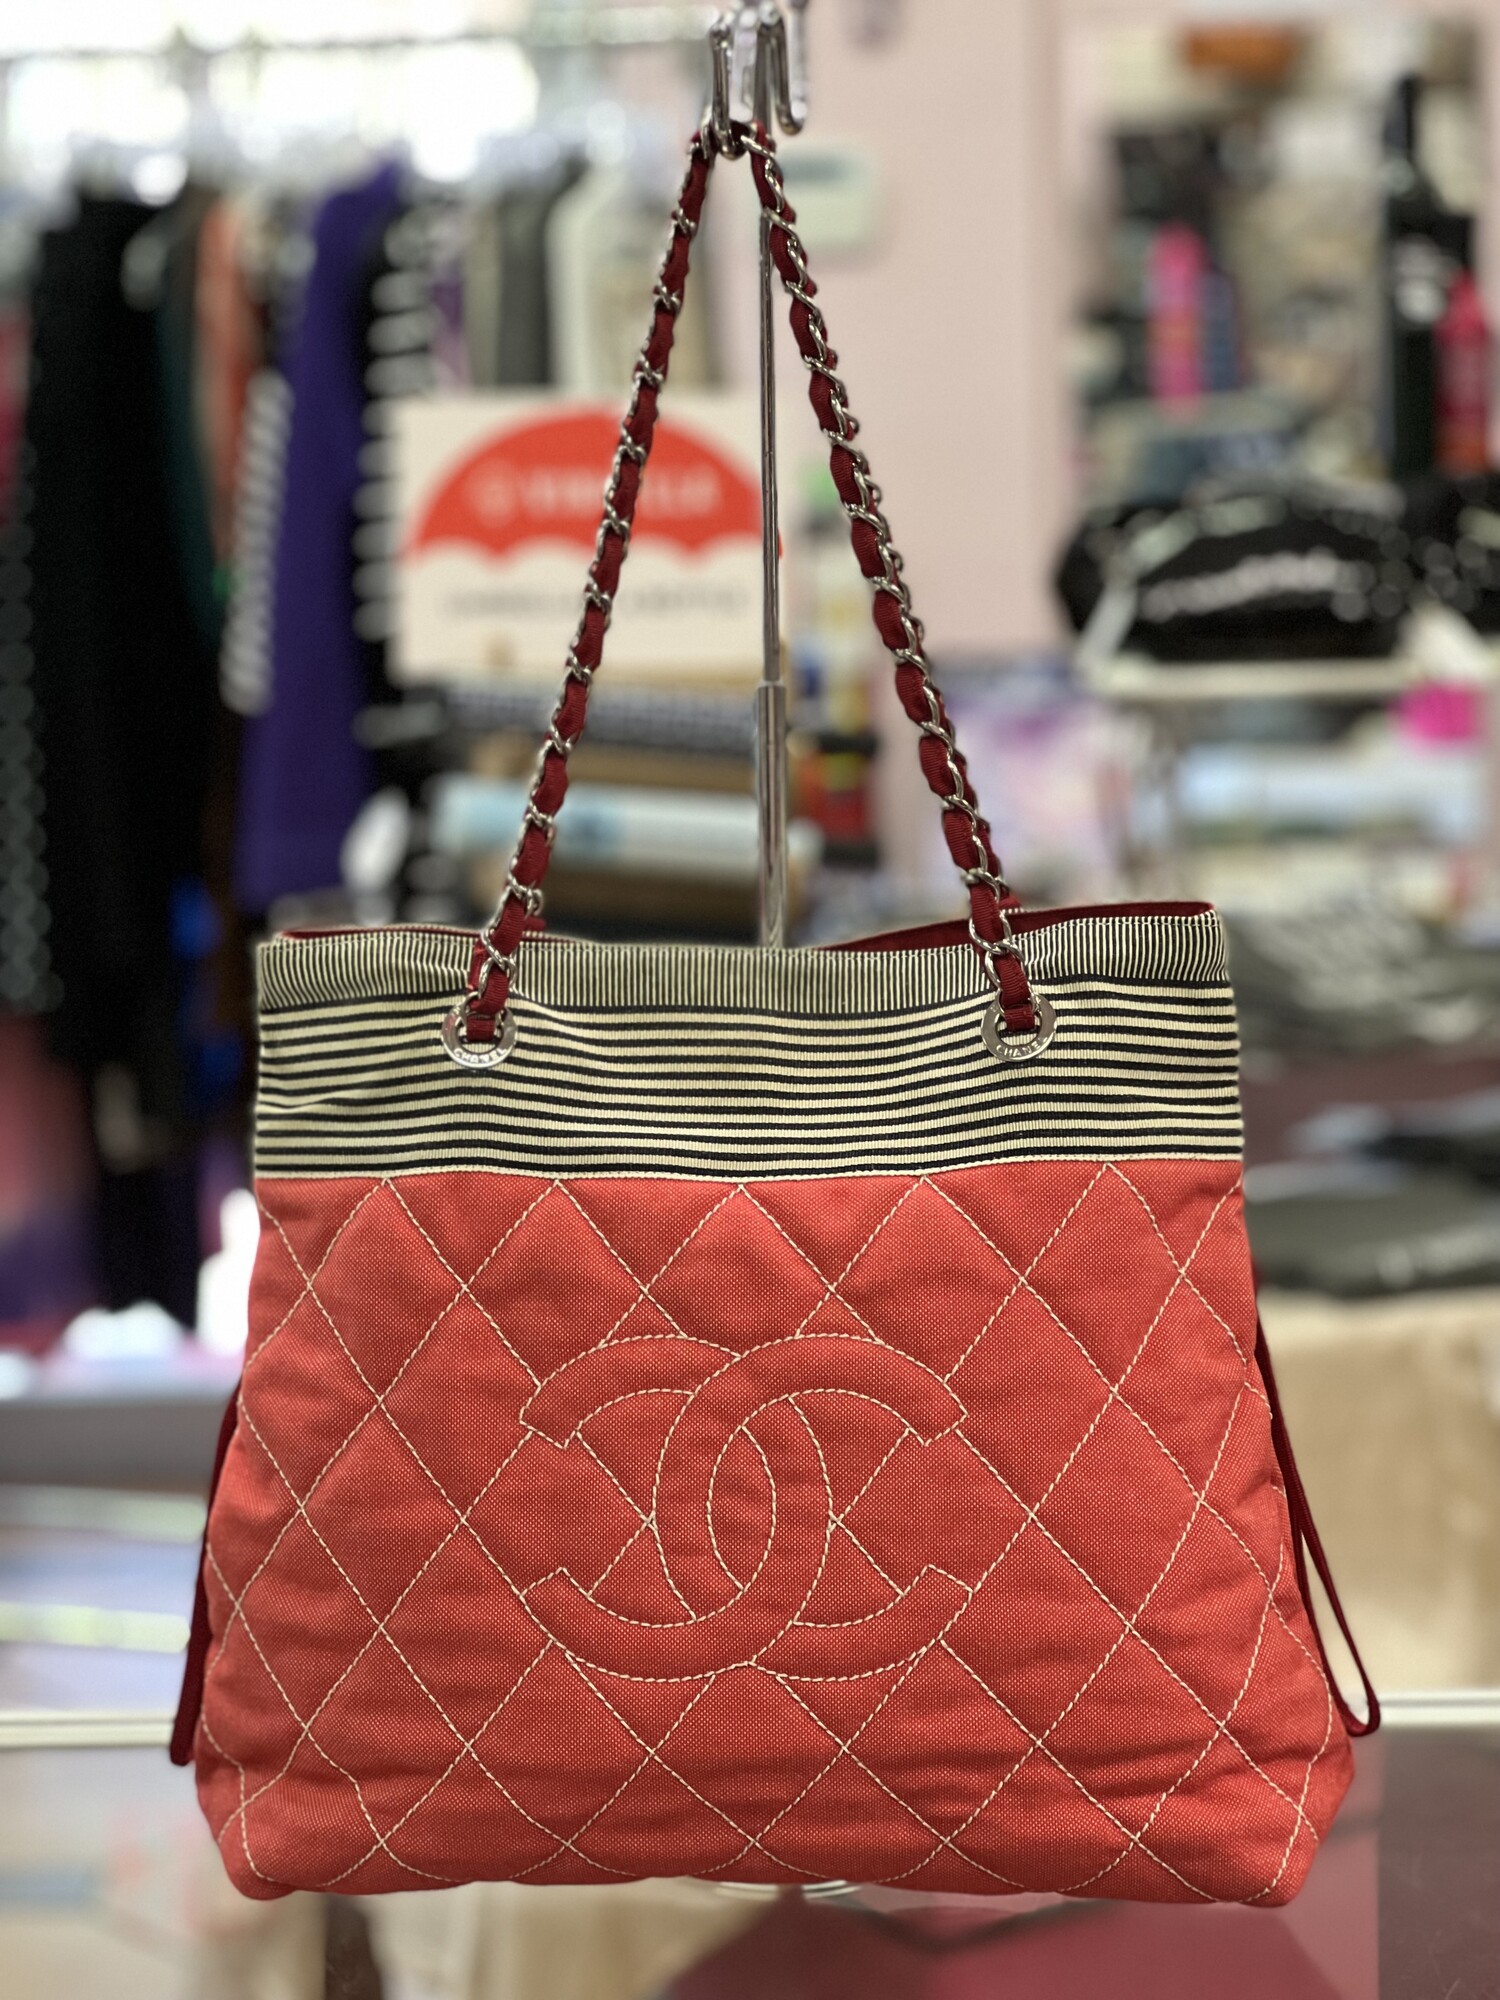 CHANEL

Chanel Red & Stripe Canvas Cruise Line Chain Shoulder Bag with silver-tone hardware, red canvas lining, interior slip and zip pockets, dual chain leather shoulder strap, and zipper closure at the top.
This bag does come with CERTIFICATE OF AUTHENTICITY!
Resale website Grailed has this bag in similar condition for $1895.00 and 1st Dibs ha this for sale for $1516.00

About the Designer
Chanel
In the years following the opening of her modest millinery shop, Gabrielle \"Coco\" Chanel became a pivotal designer of both fashionable casual wear and Paris haute couture as well as an icon and arbiter of 20th-century style with her bob haircut and pearls. Today vintage Chanel handbags, jackets and evening dresses are among the most sought-after clothing and accessories for fashion lovers all over the world.

The first Chanel shop was established in 1910 in Paris on rue Cambon by the young milliner Gabrielle Chanel (1883-1971), who had picked up the nickname \"Coco\" while working as a club singer. The boutique drew the attention of the Parisian fashion elite who popularized her wide-brimmed Chanel Modes hats. Soon she added a sportswear store in the Normandy resort town of Deauville, where Coco set the tone for her defining sense of style, traditionally masculine garments reimagined for feminine shapes, made from simple jersey fabric.

Effortless and elegant, Chanel's designs promoted comfort and grace in women’s wear that had been dominated in the previous century by complicated layers of fabric and cumbersome corsets. She followed this success with a couture house, opened in 1915 in Biarritz.

But Chanel was not born into a life of glamour. Following the death of her mother, her father left her in an orphanage where she lived until the age of 18. It was there that she learned to sew as well as appreciate the classic pairing of black and white as worn by the nuns. In 1926, she introduced her first little black dress, reclaiming a color that had once been reserved for mourning and working-class women. That same decade, she debuted her perfume, Chanel No. 5, as well as the Chanel suit with a fitted skirt, inspired by the boxy lines of men’s clothing and employing a sporty tweed.

Chanel closed her fashion operations during World War II, then returned to the industry in 1954 to design for the functional needs of modern women. Structure and wearability endured in all of Chanel’s clothing and accessories, like the quilted leather 2.55 handbag introduced in 1955 with its gold-chain shoulder strap that freed up a woman’s hands. Chanel's collarless jacket reacted against the constricting styles of Christian Dior's New Look, replacing them with a design that was timeless, an instant classic. The 1957 two-tone slingback pumps had a practical heel height while offering a bold statement in the black tip of the shoes.

After Coco Chanel died in 1971, the brand underwent several changes in leadership, including fashion designer Karl Lagerfeld, who took over as artistic director in 1983. Over the years, the company has continued to innovate, such as expanding into ready-to-wear fashion in 1978 and, in 2002, establishing a subsidiary company  \"Paraffection\" dedicated to preserving the heritage skills of fashion artisan workshops. The House of Chanel still operates its flagship on rue Cambon in Paris, where it all began.